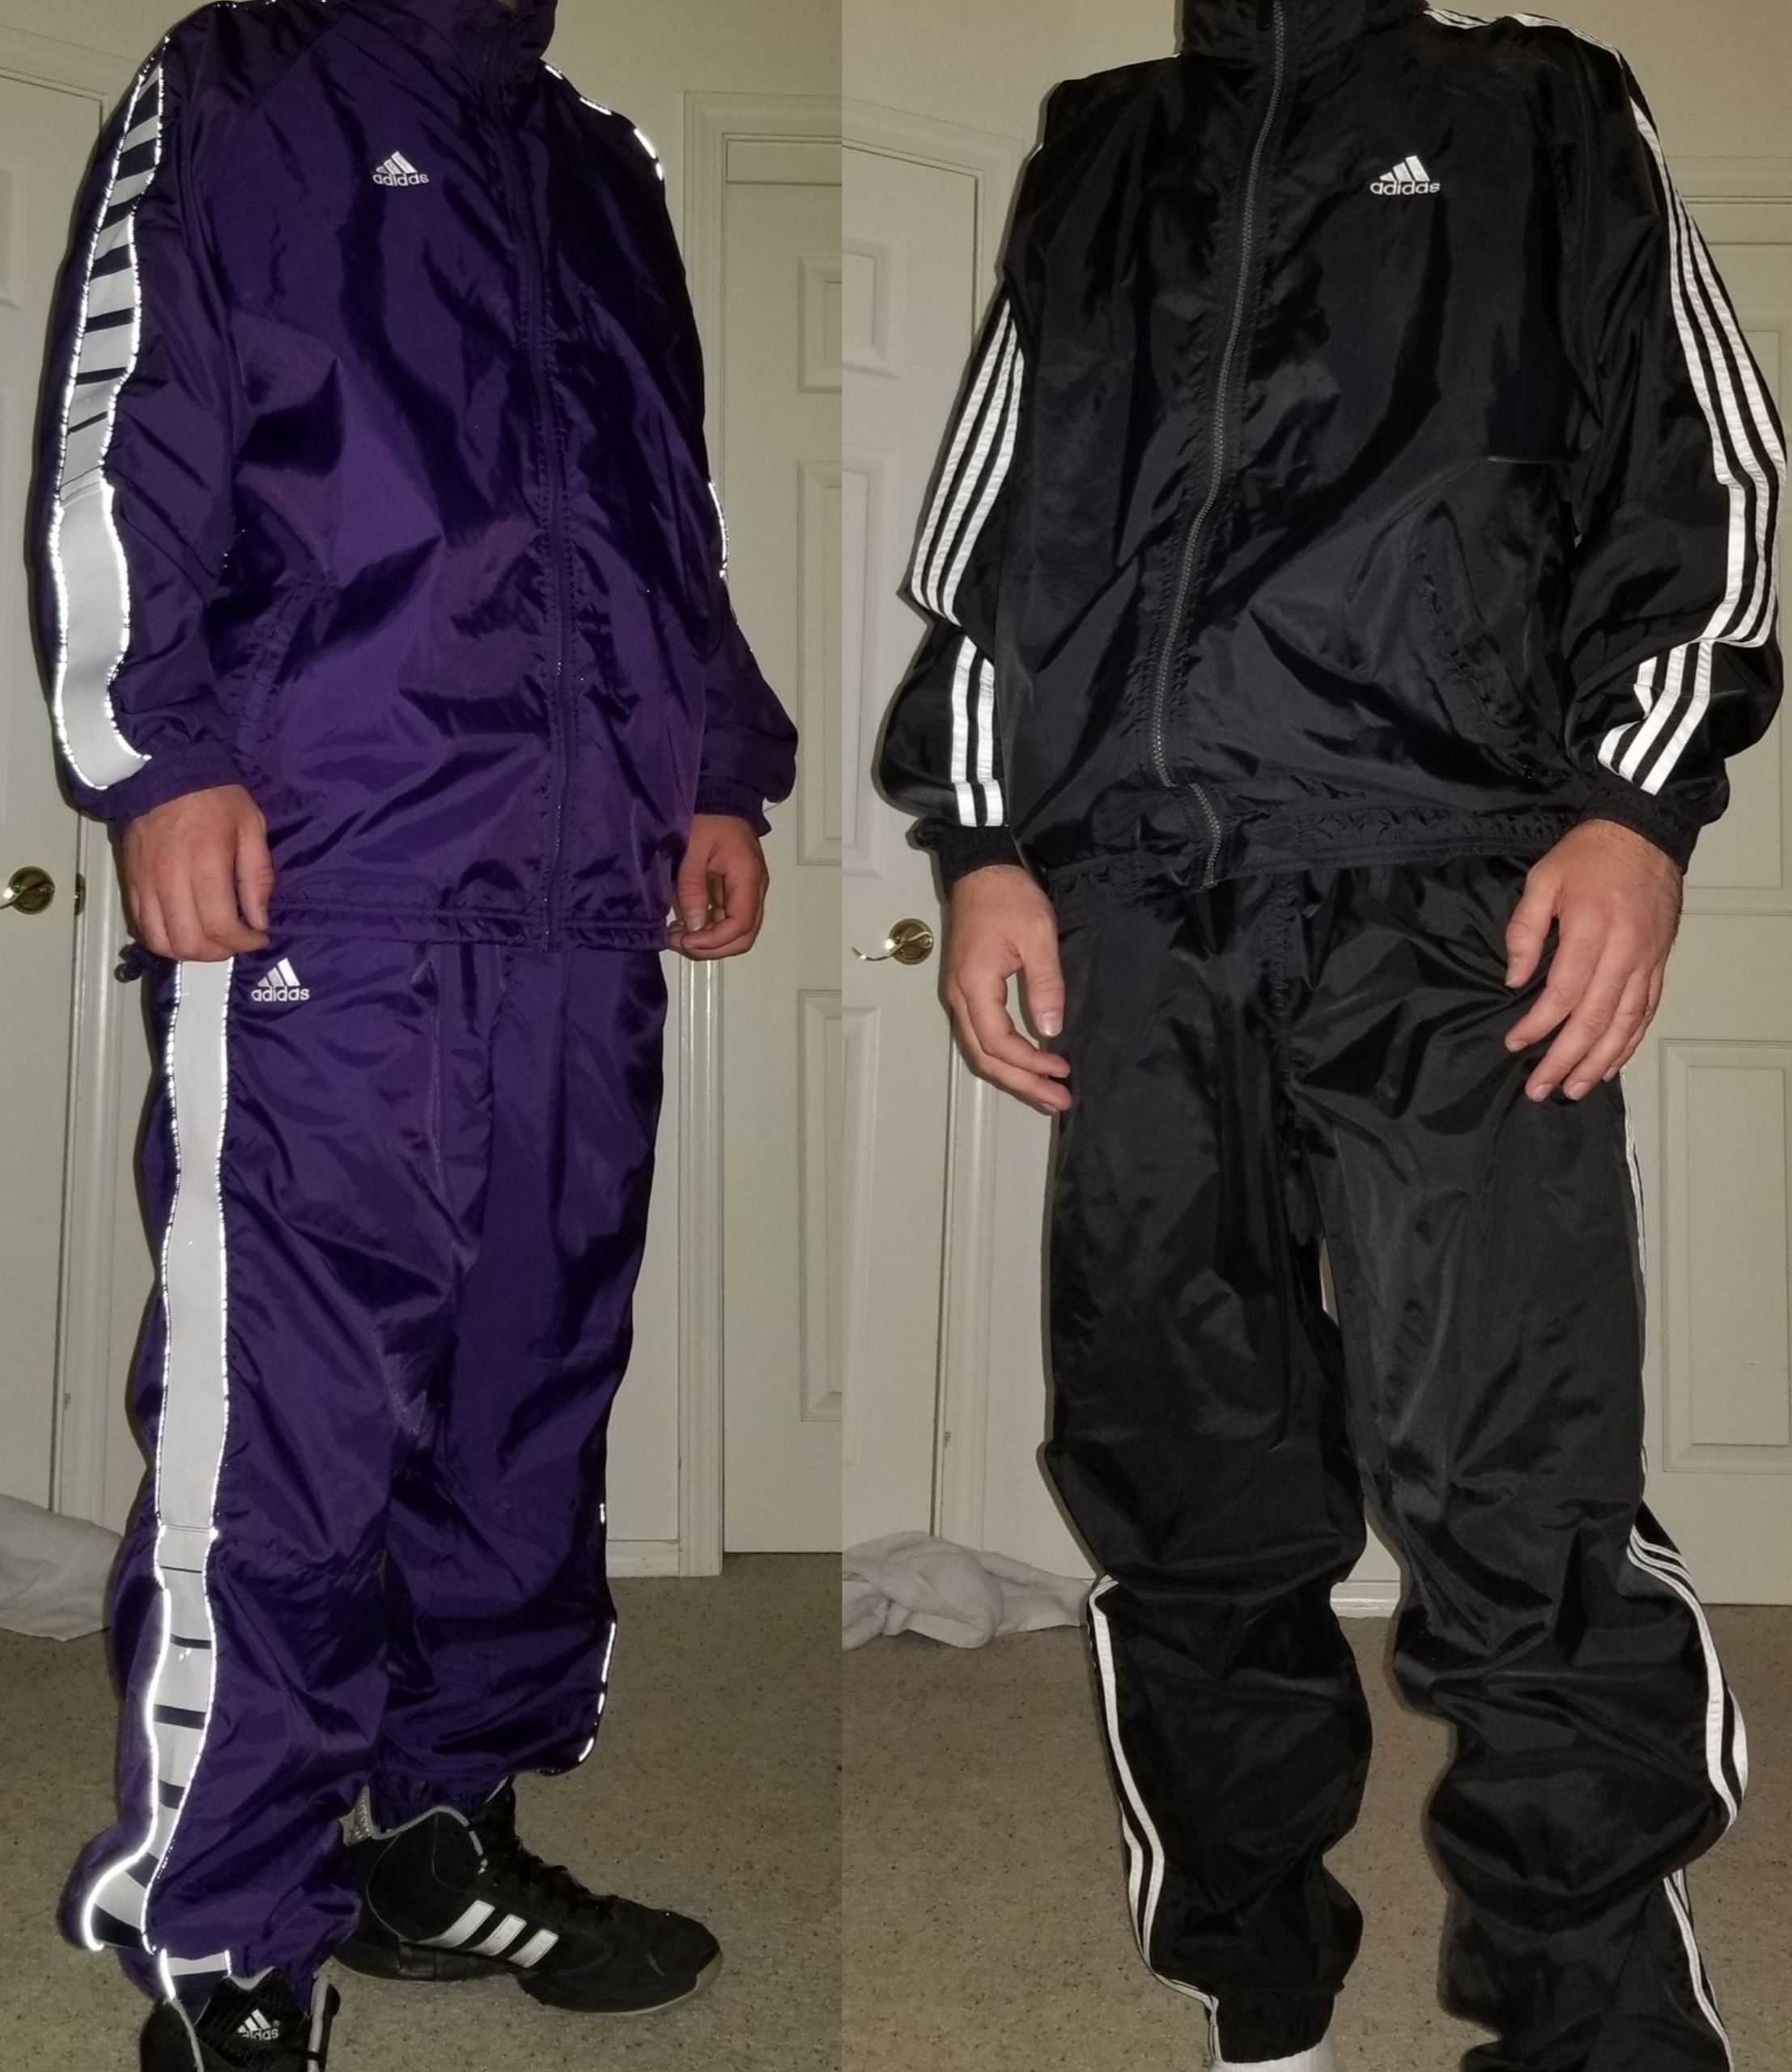 Two of my favorite adidas suits